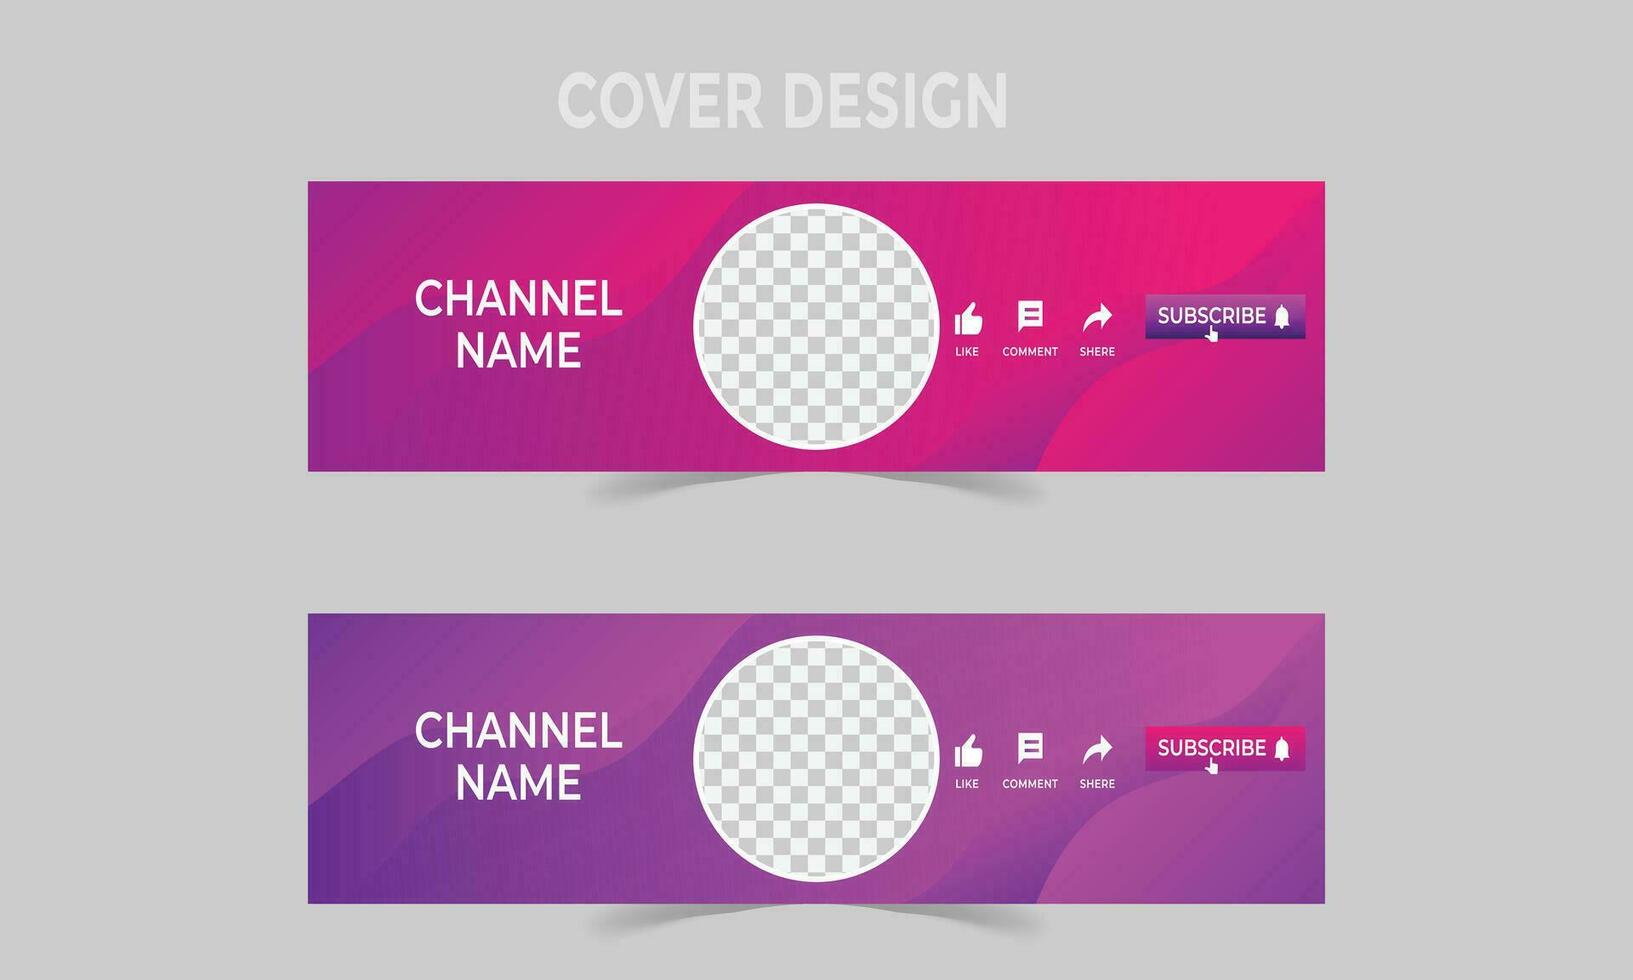 modern channel cover design layout with vector format.